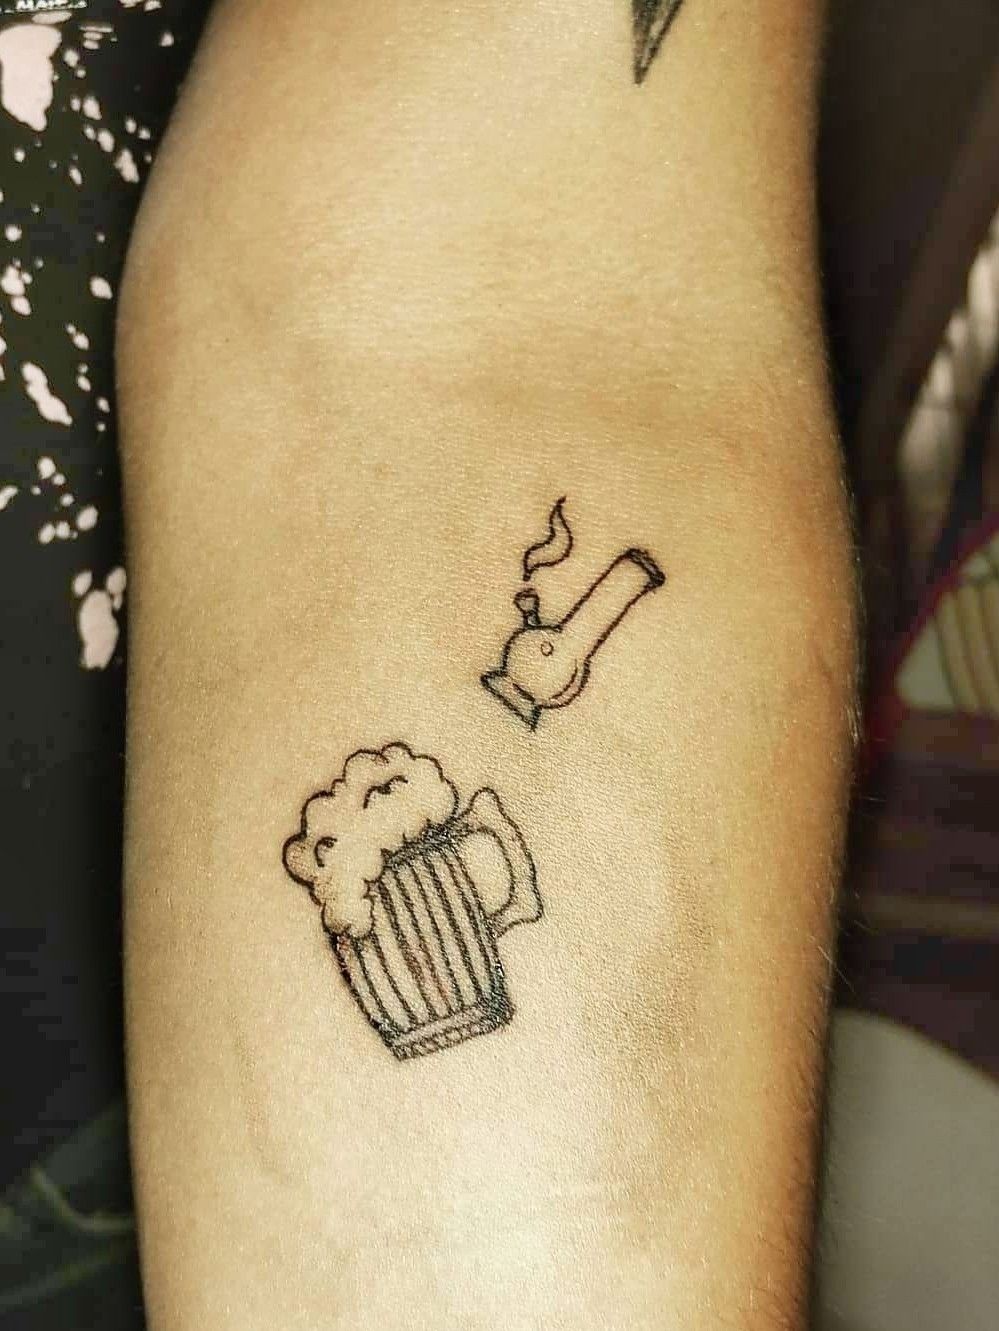 how to make a beer bottle tattoo design on hand tattoo  YouTube